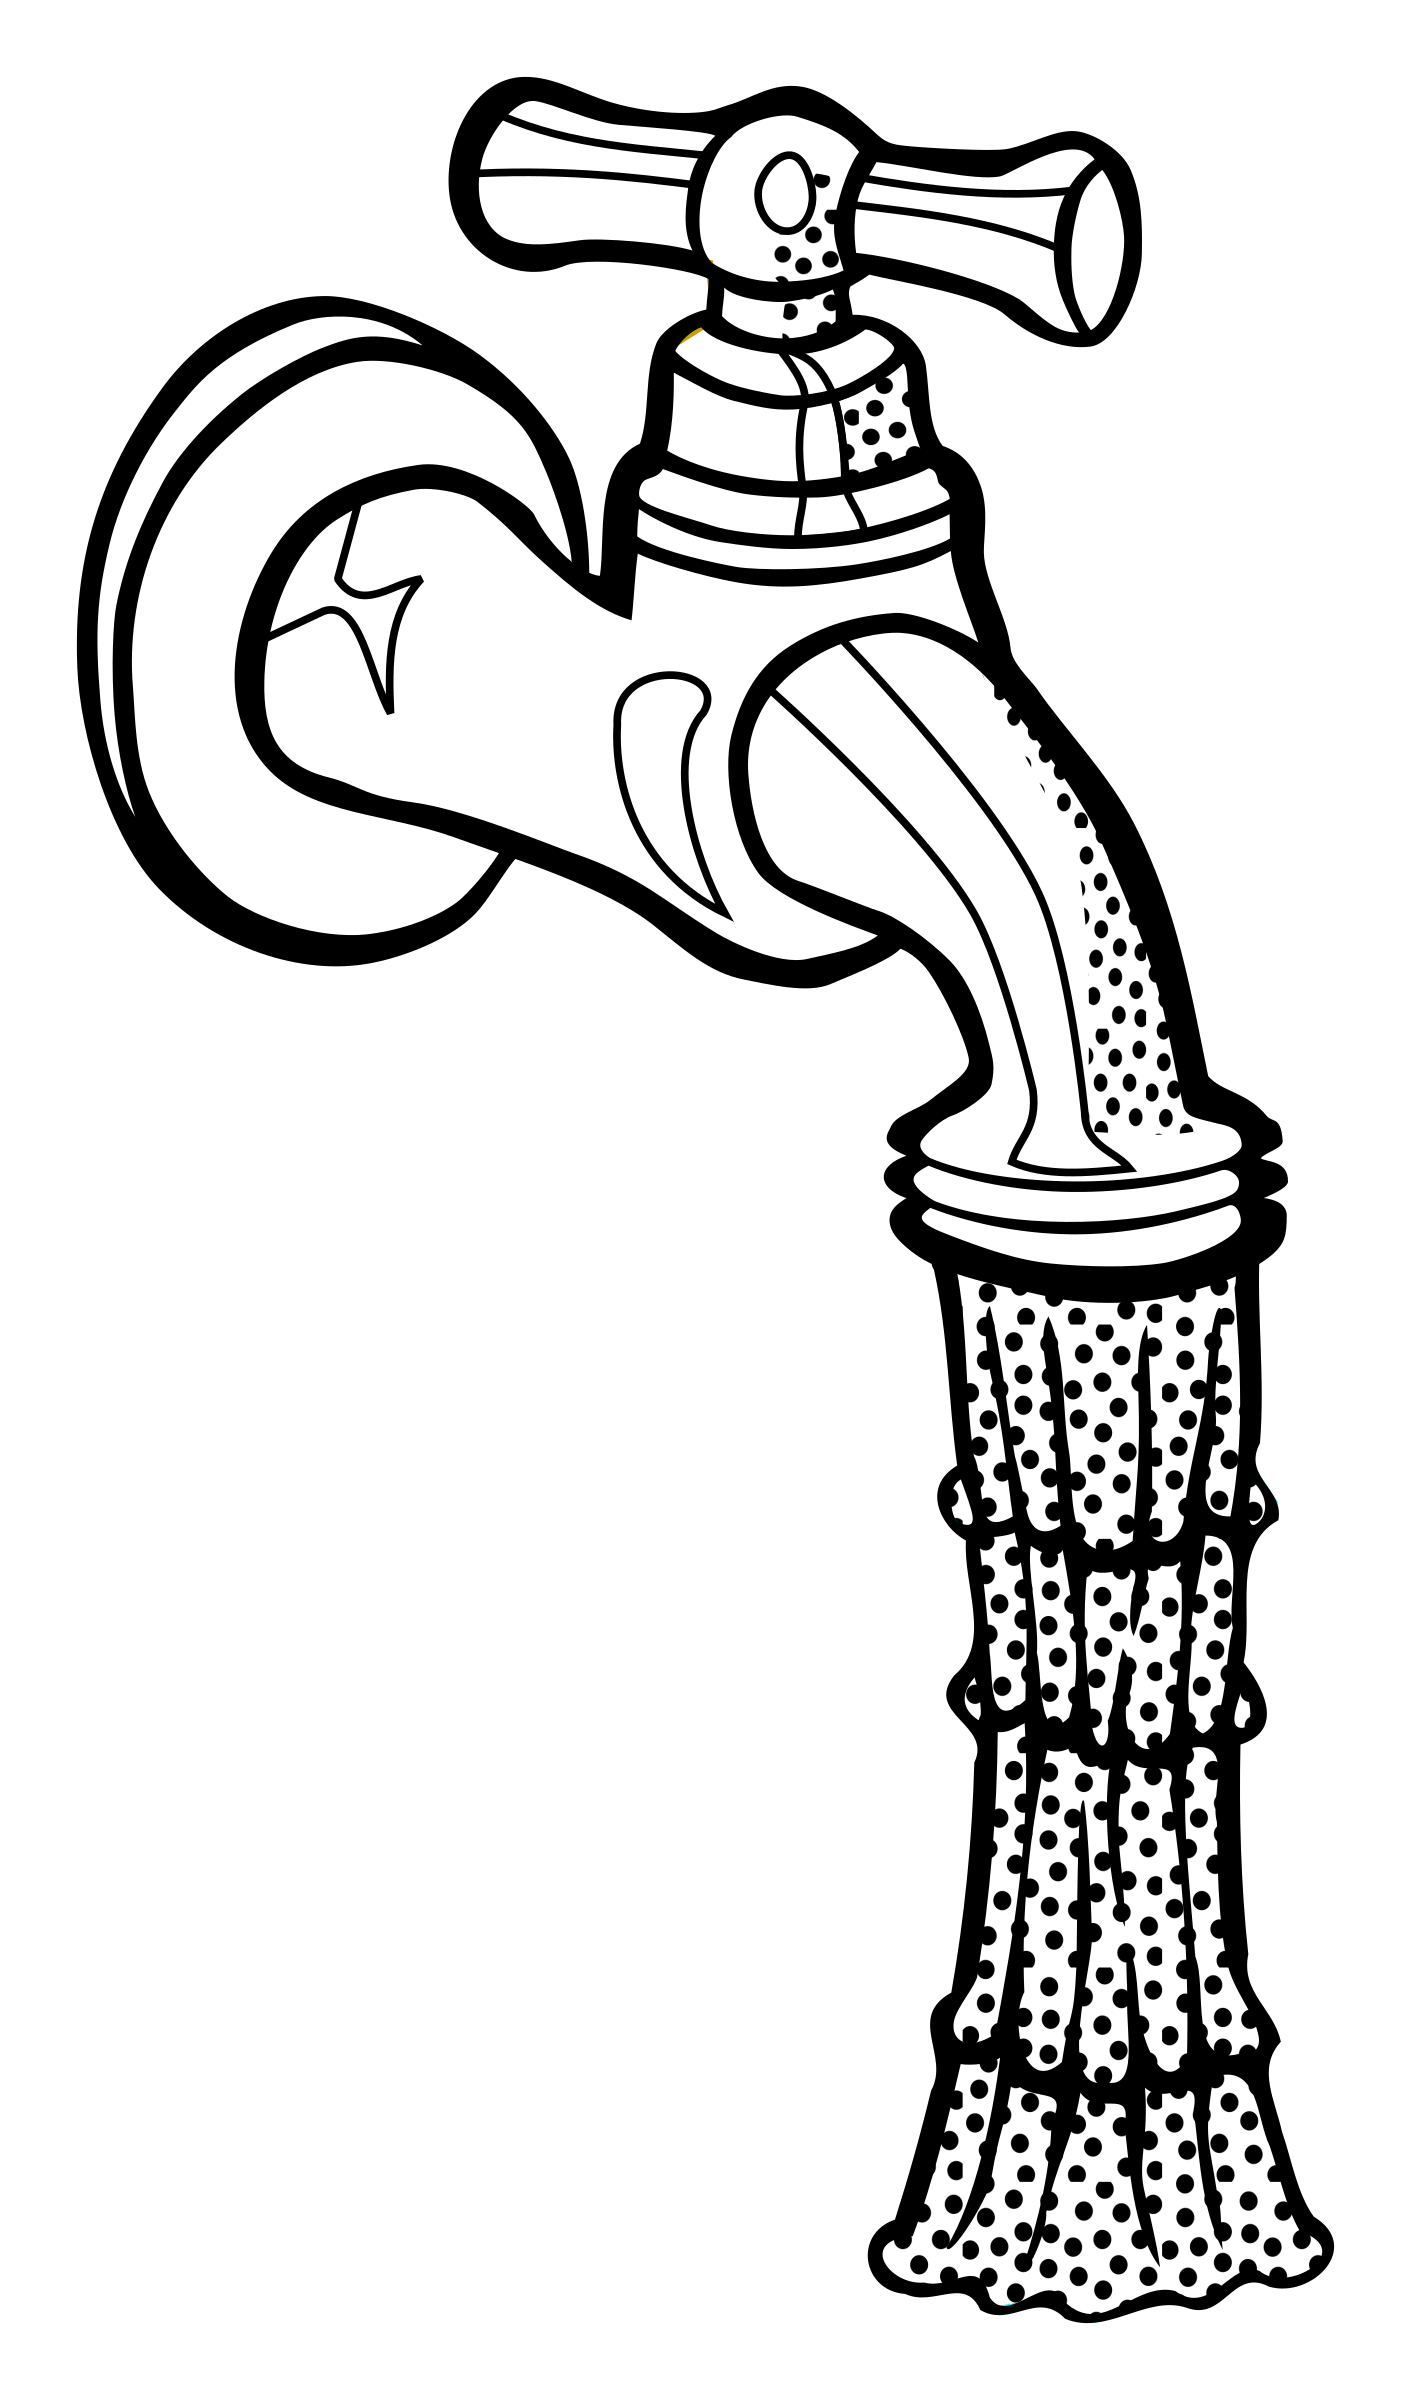 Faucet clipart water pipe. Coloured big image png